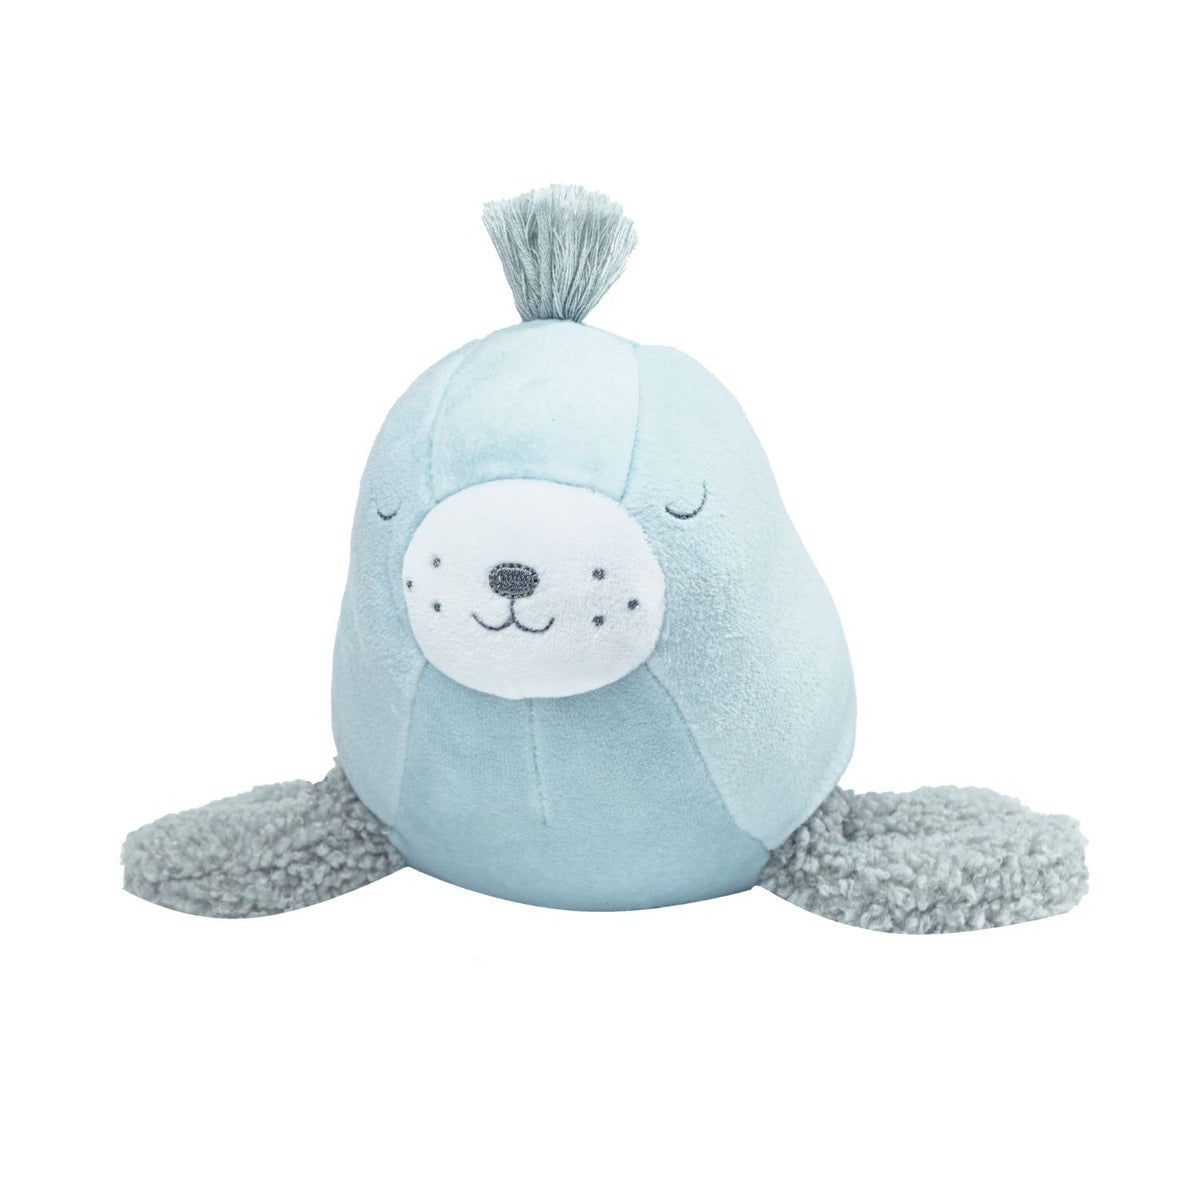 Sealy Plush - Sealy the Seal